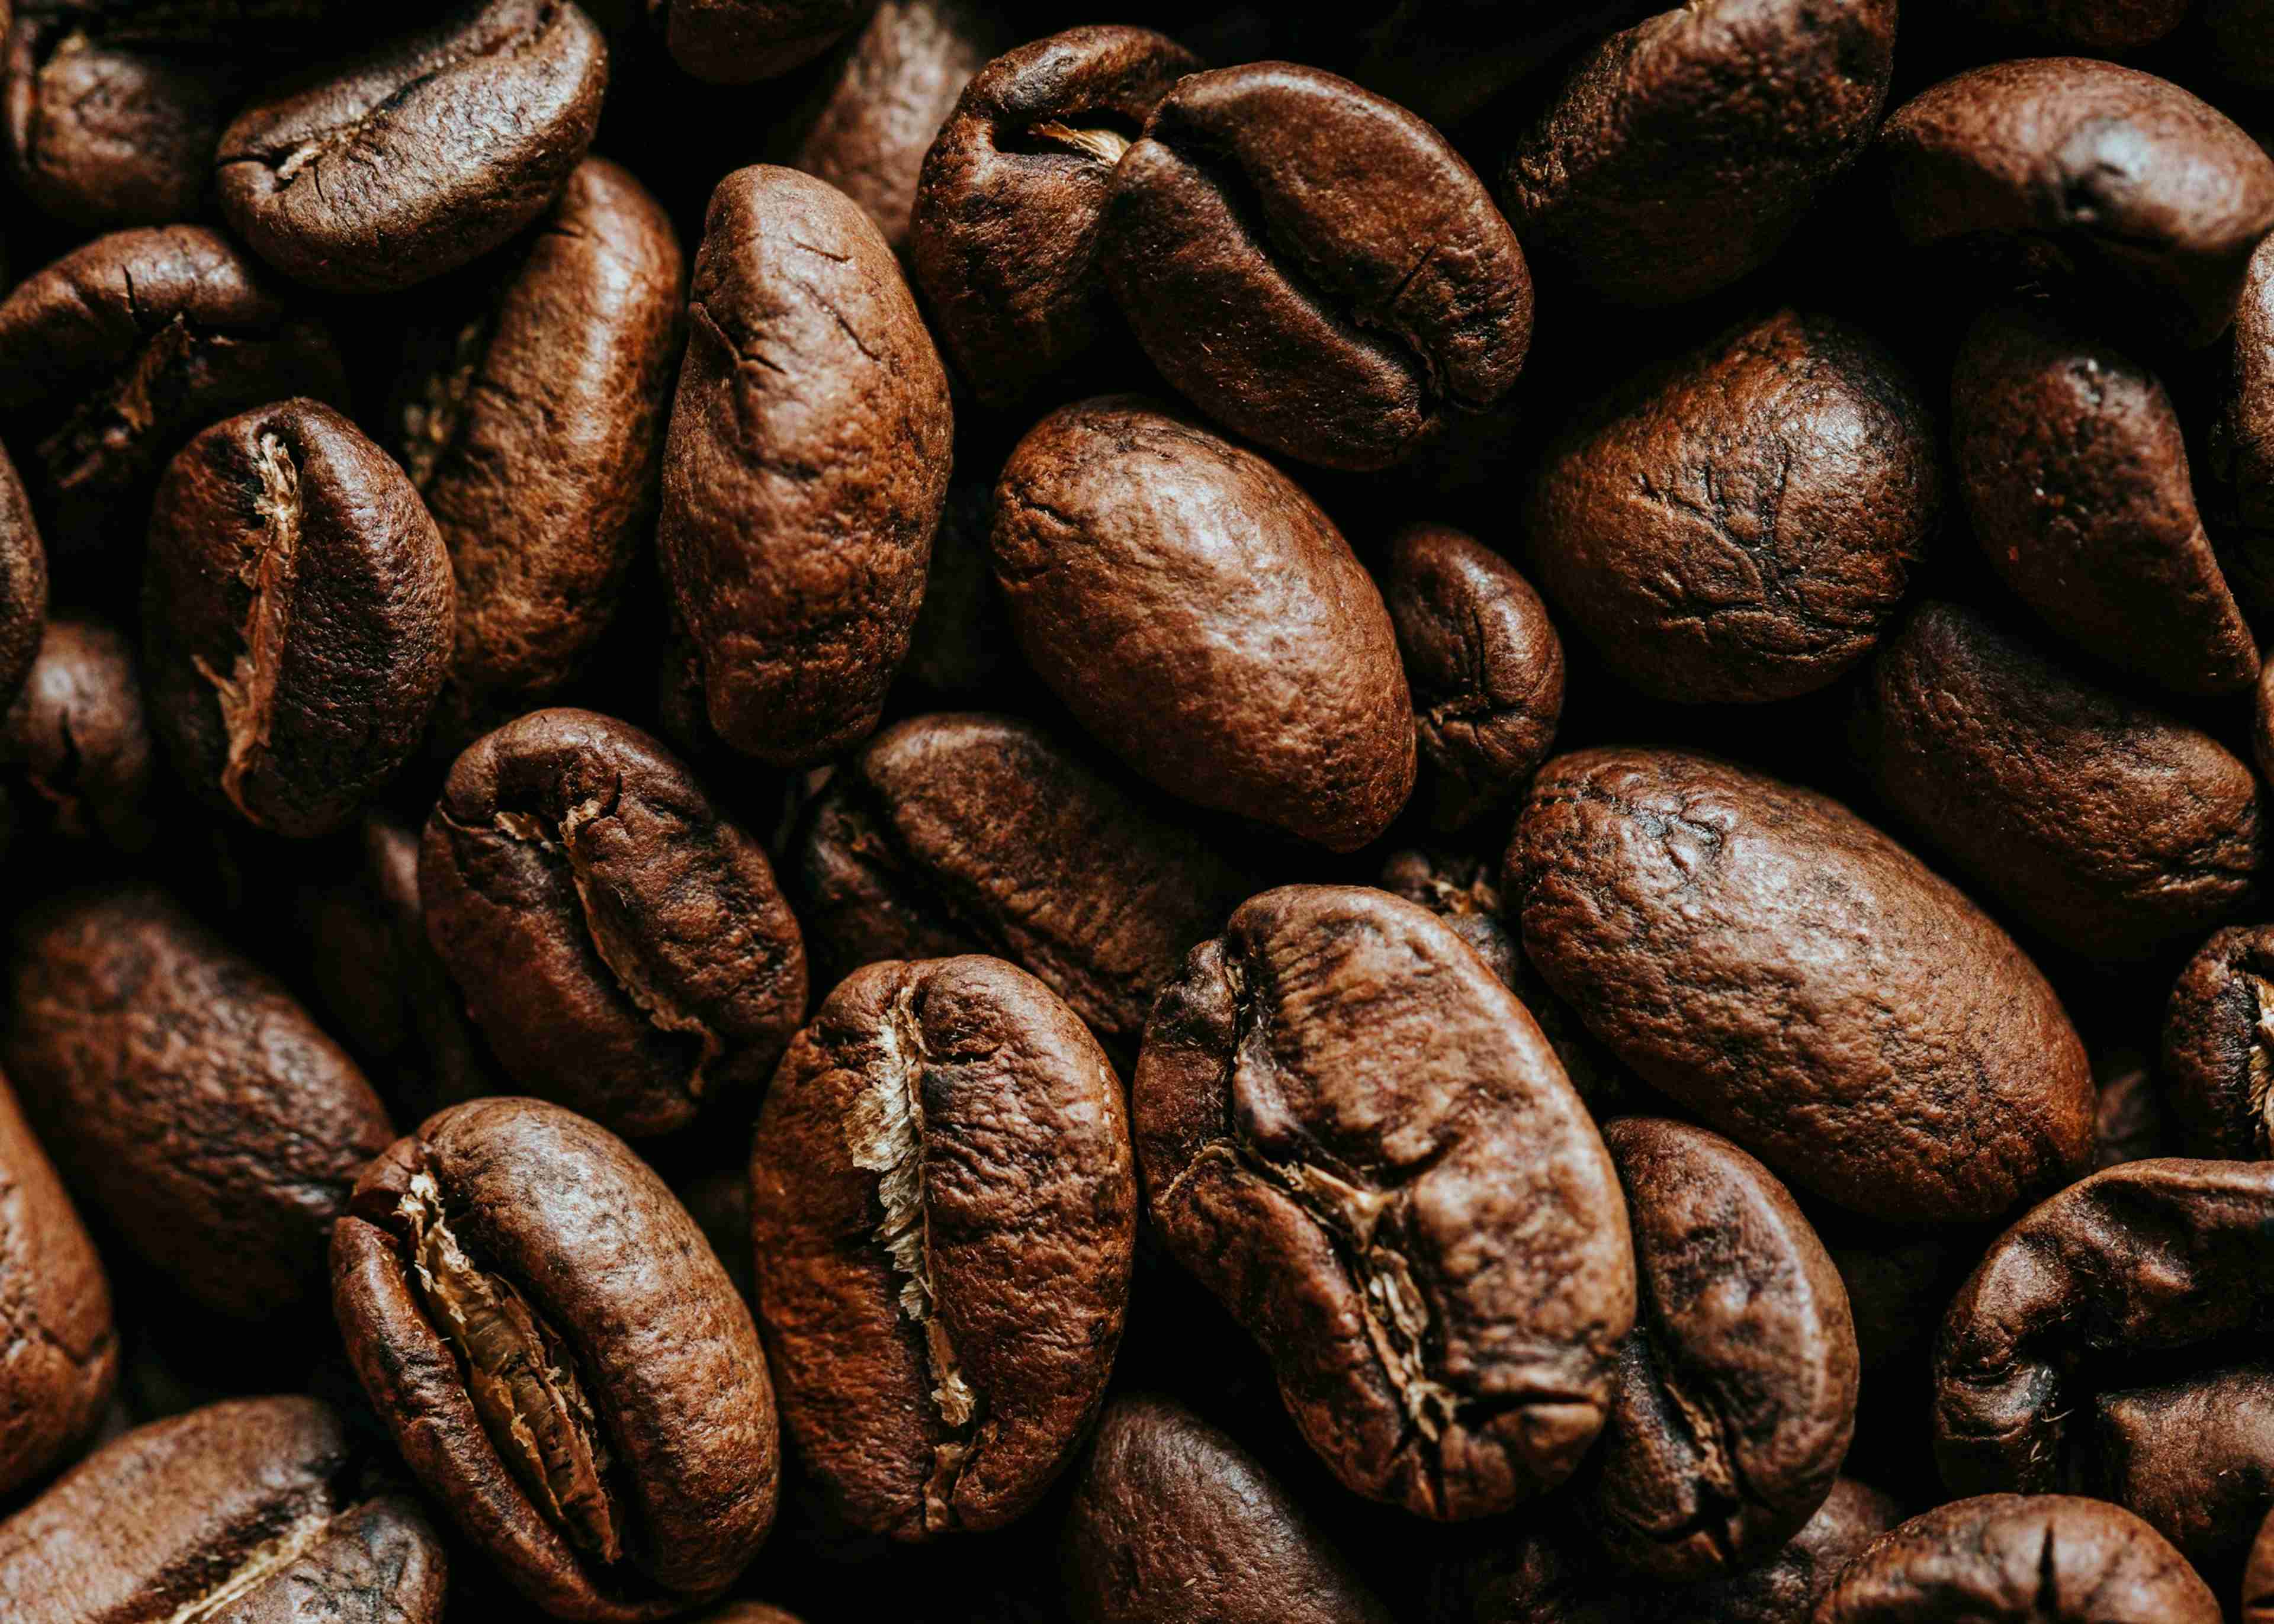 Close-up photograph of brown coffee beans